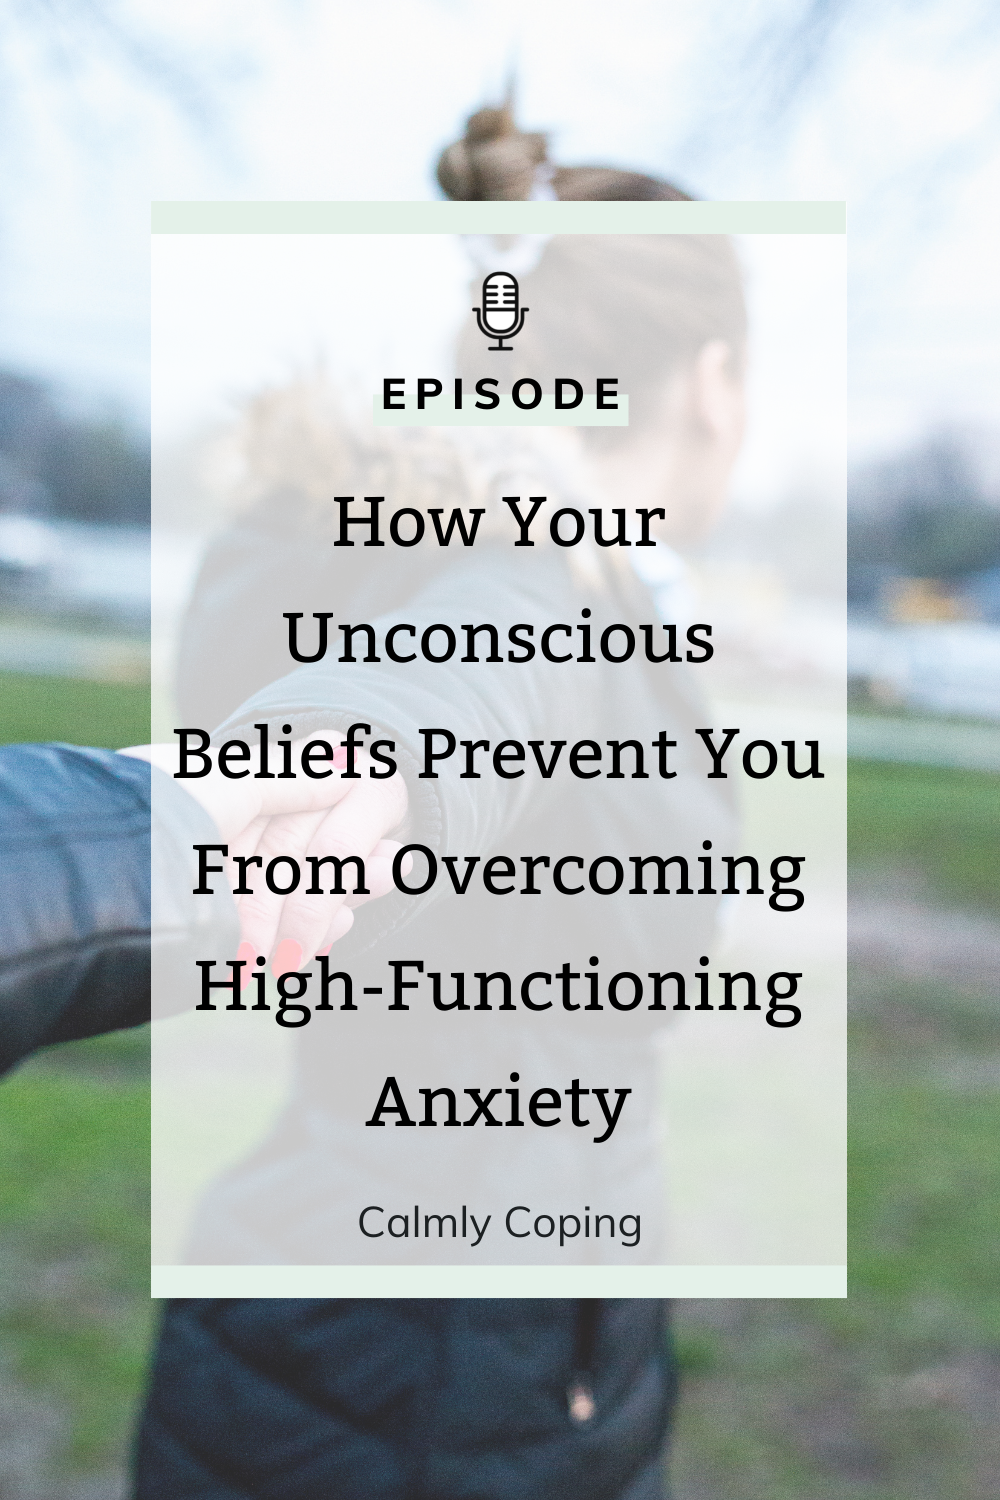 How Your Unconscious Beliefs Prevent You From Overcoming High-Functioning Anxiety